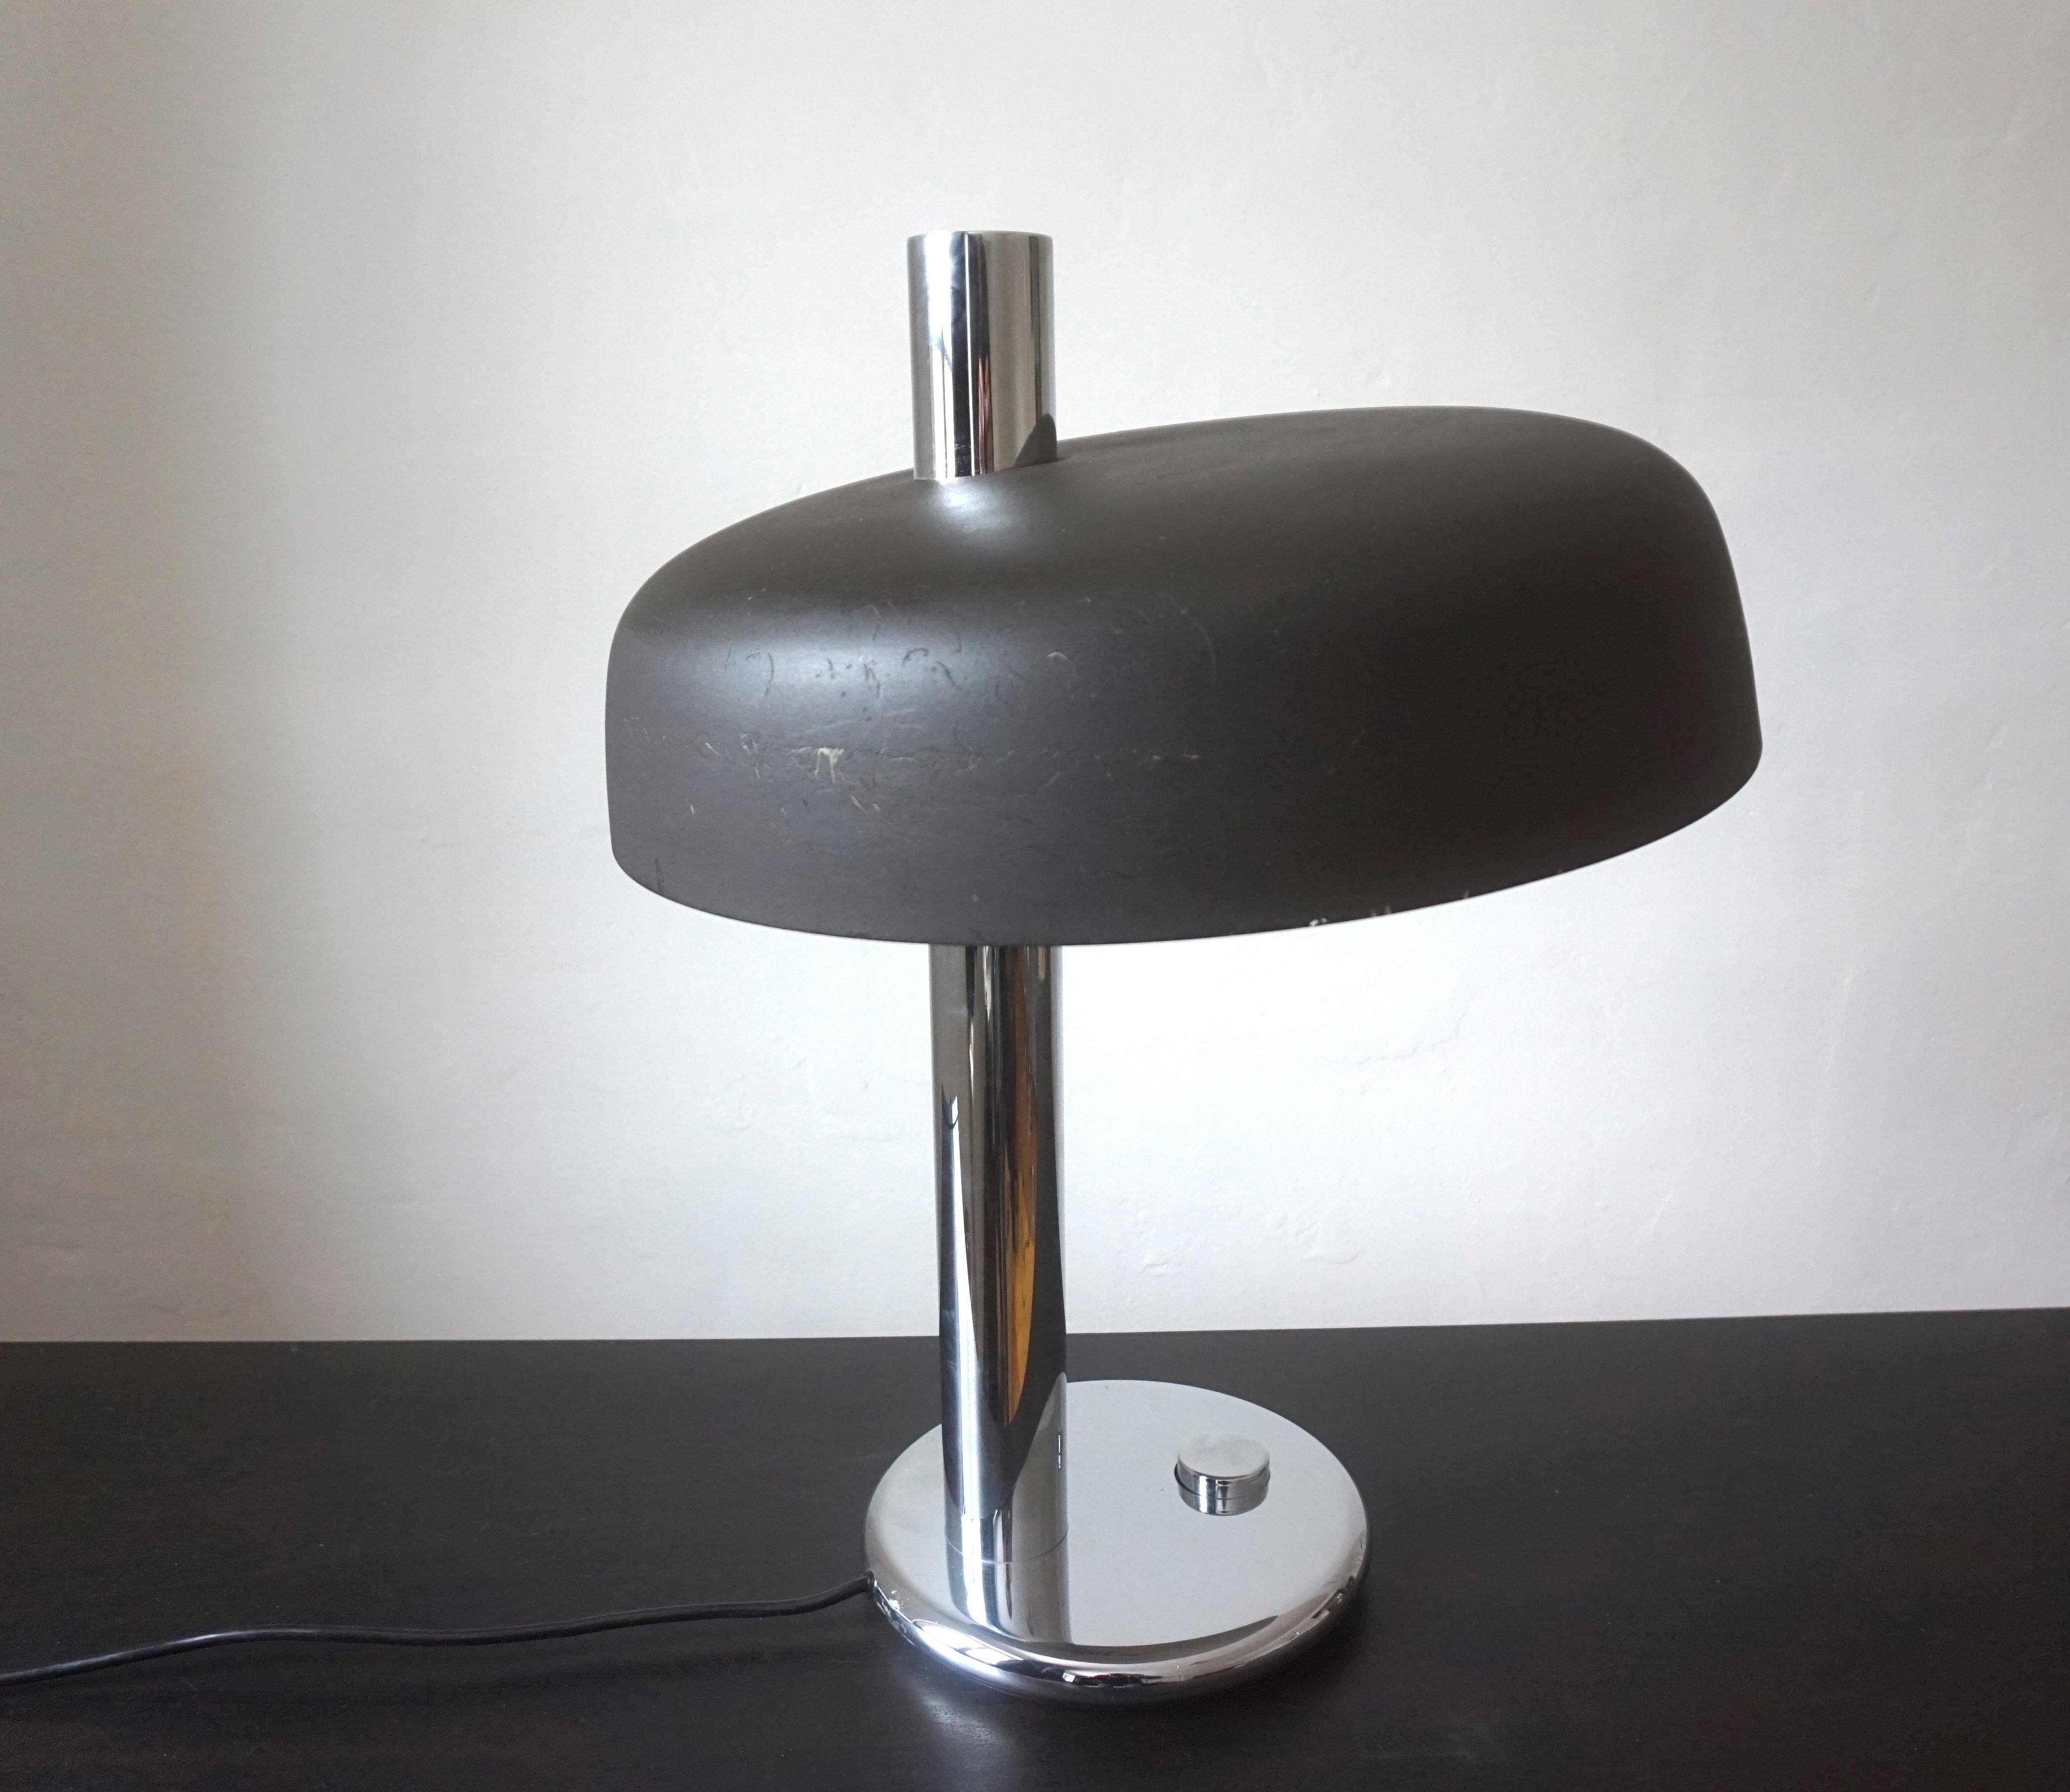 Hillebrand 7603 table lamp by FW Stahl In Good Condition For Sale In Ludwigslust, DE